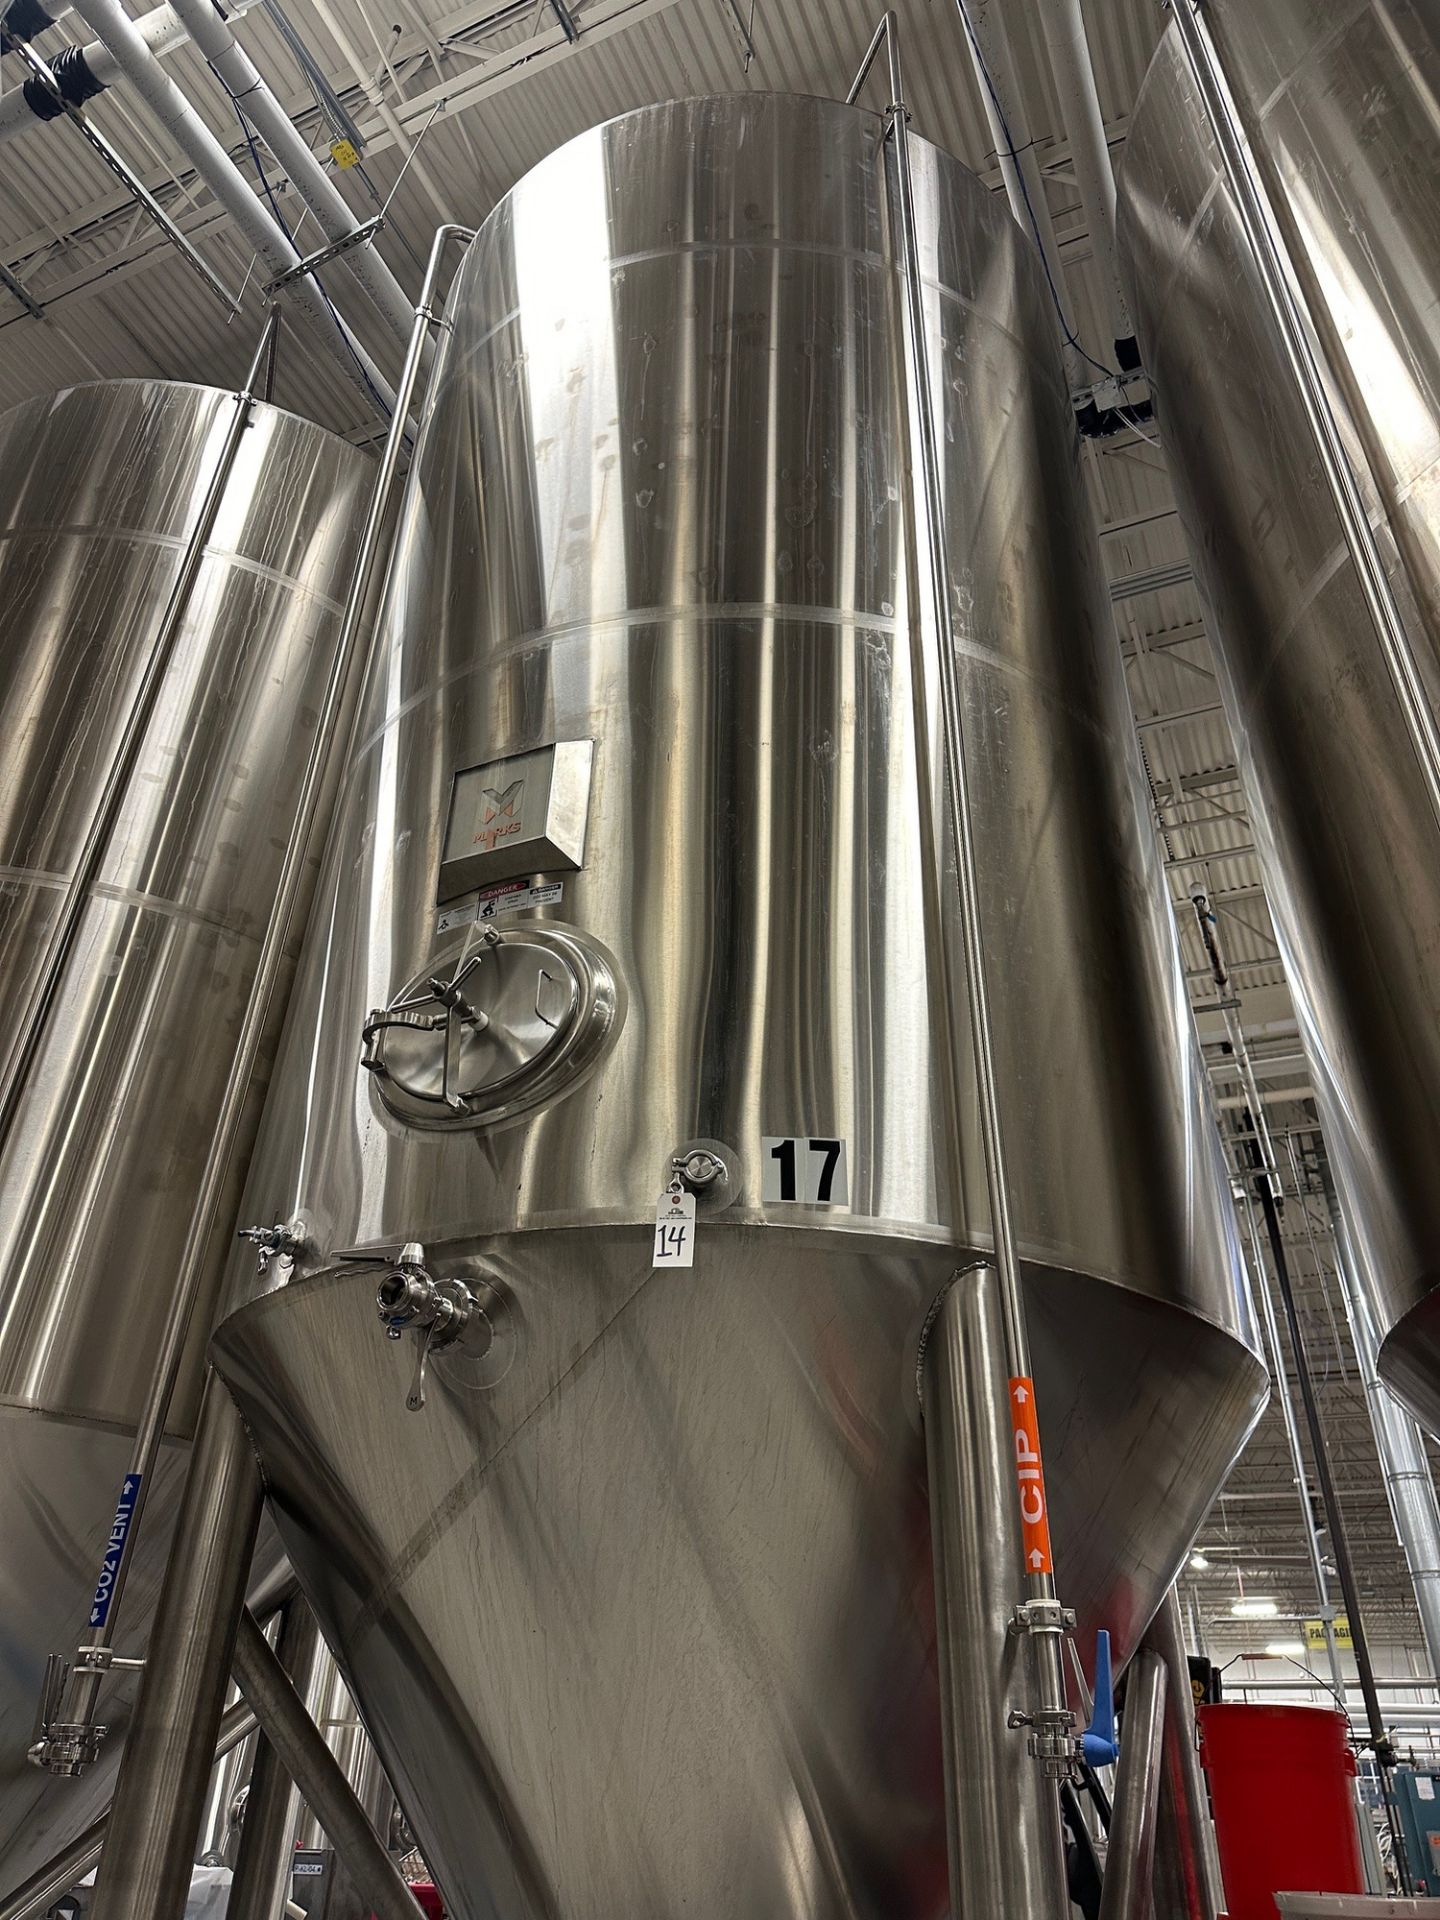 (1 of 8) 2020 Marks 132 BBL FV/ 175 BBL or 5,400 Gal Max Capacity Jacketed Stainless Steel Ferm